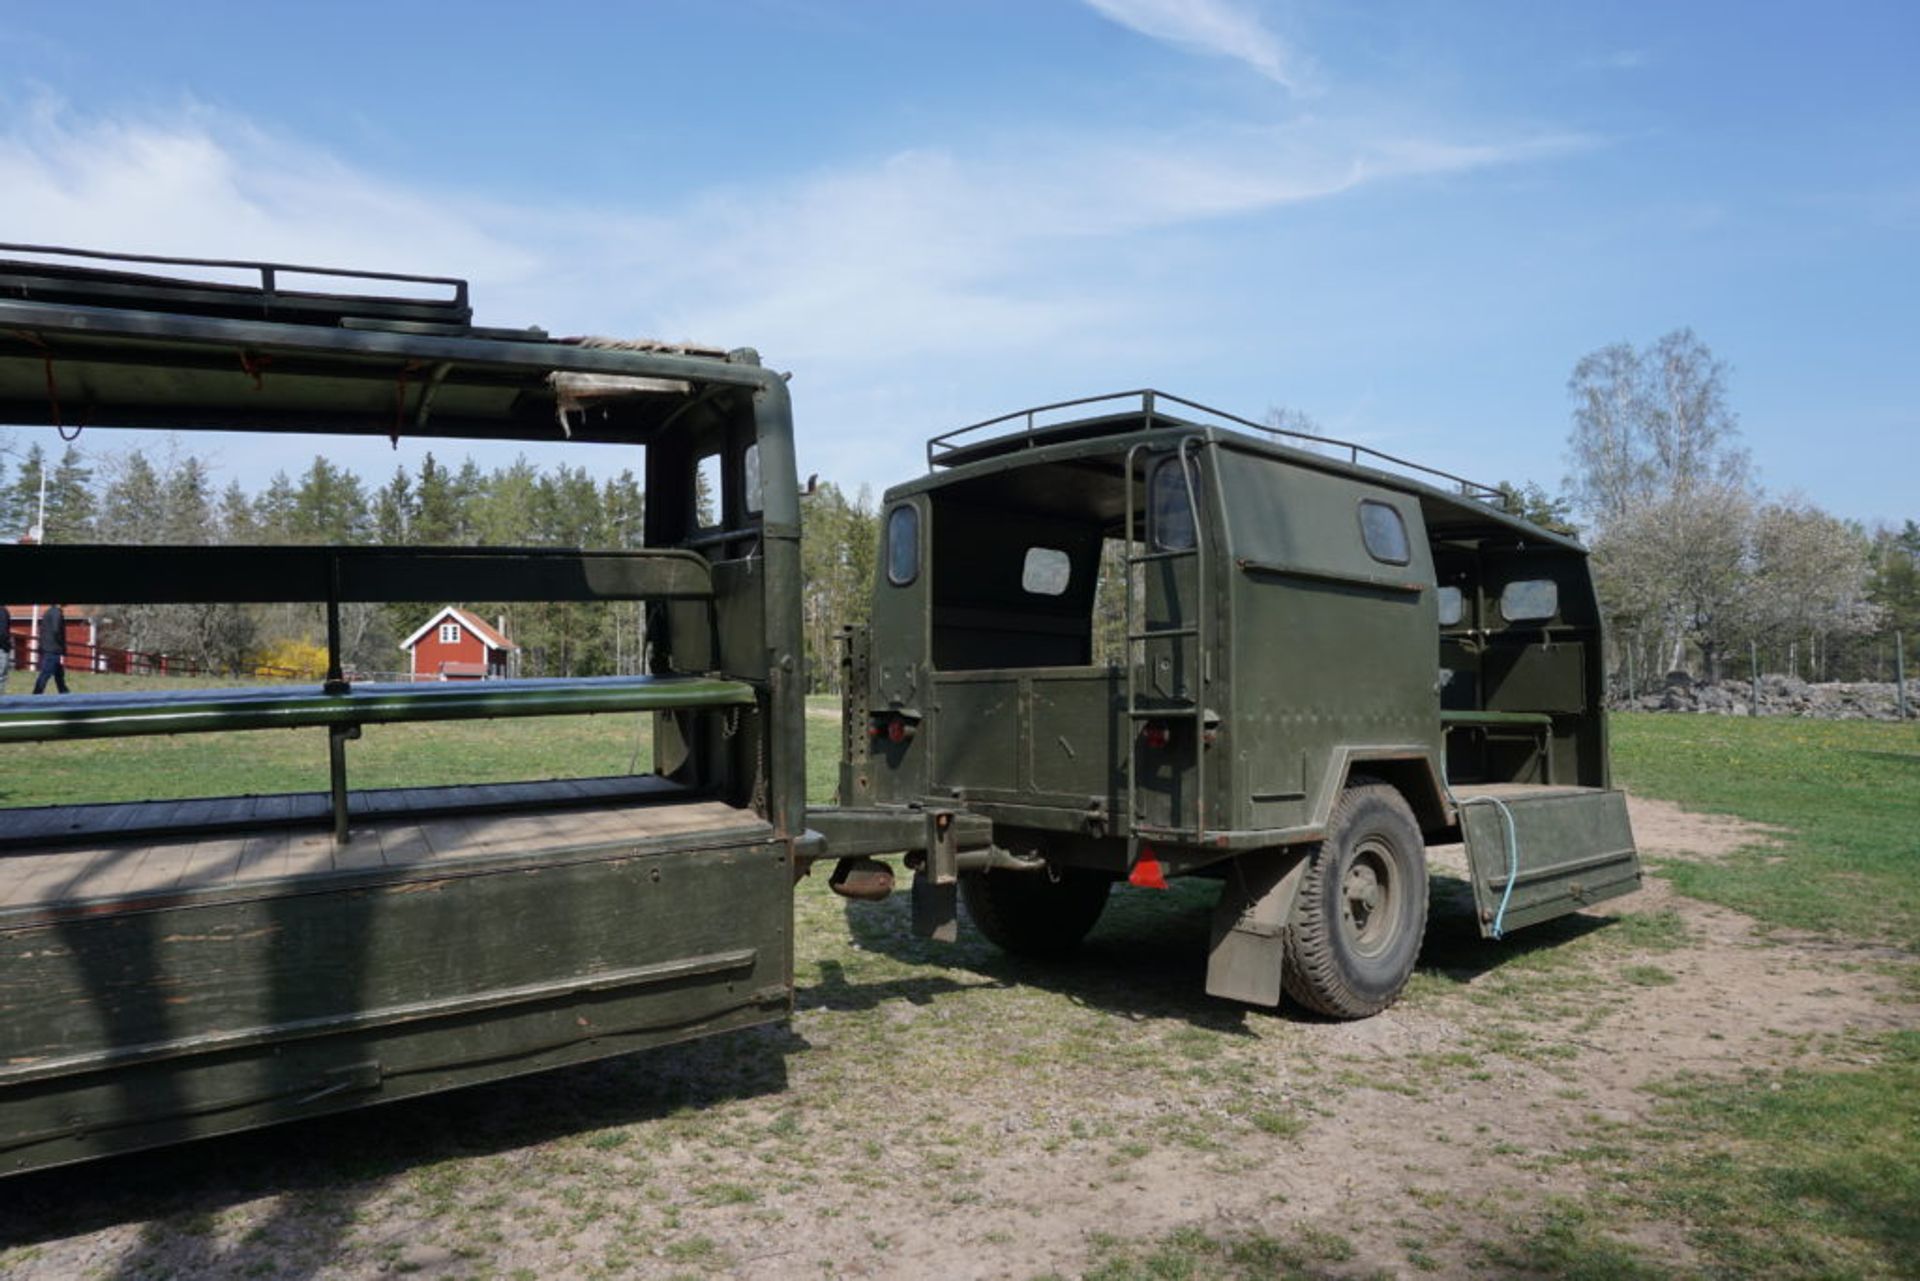 Old military style trucks.